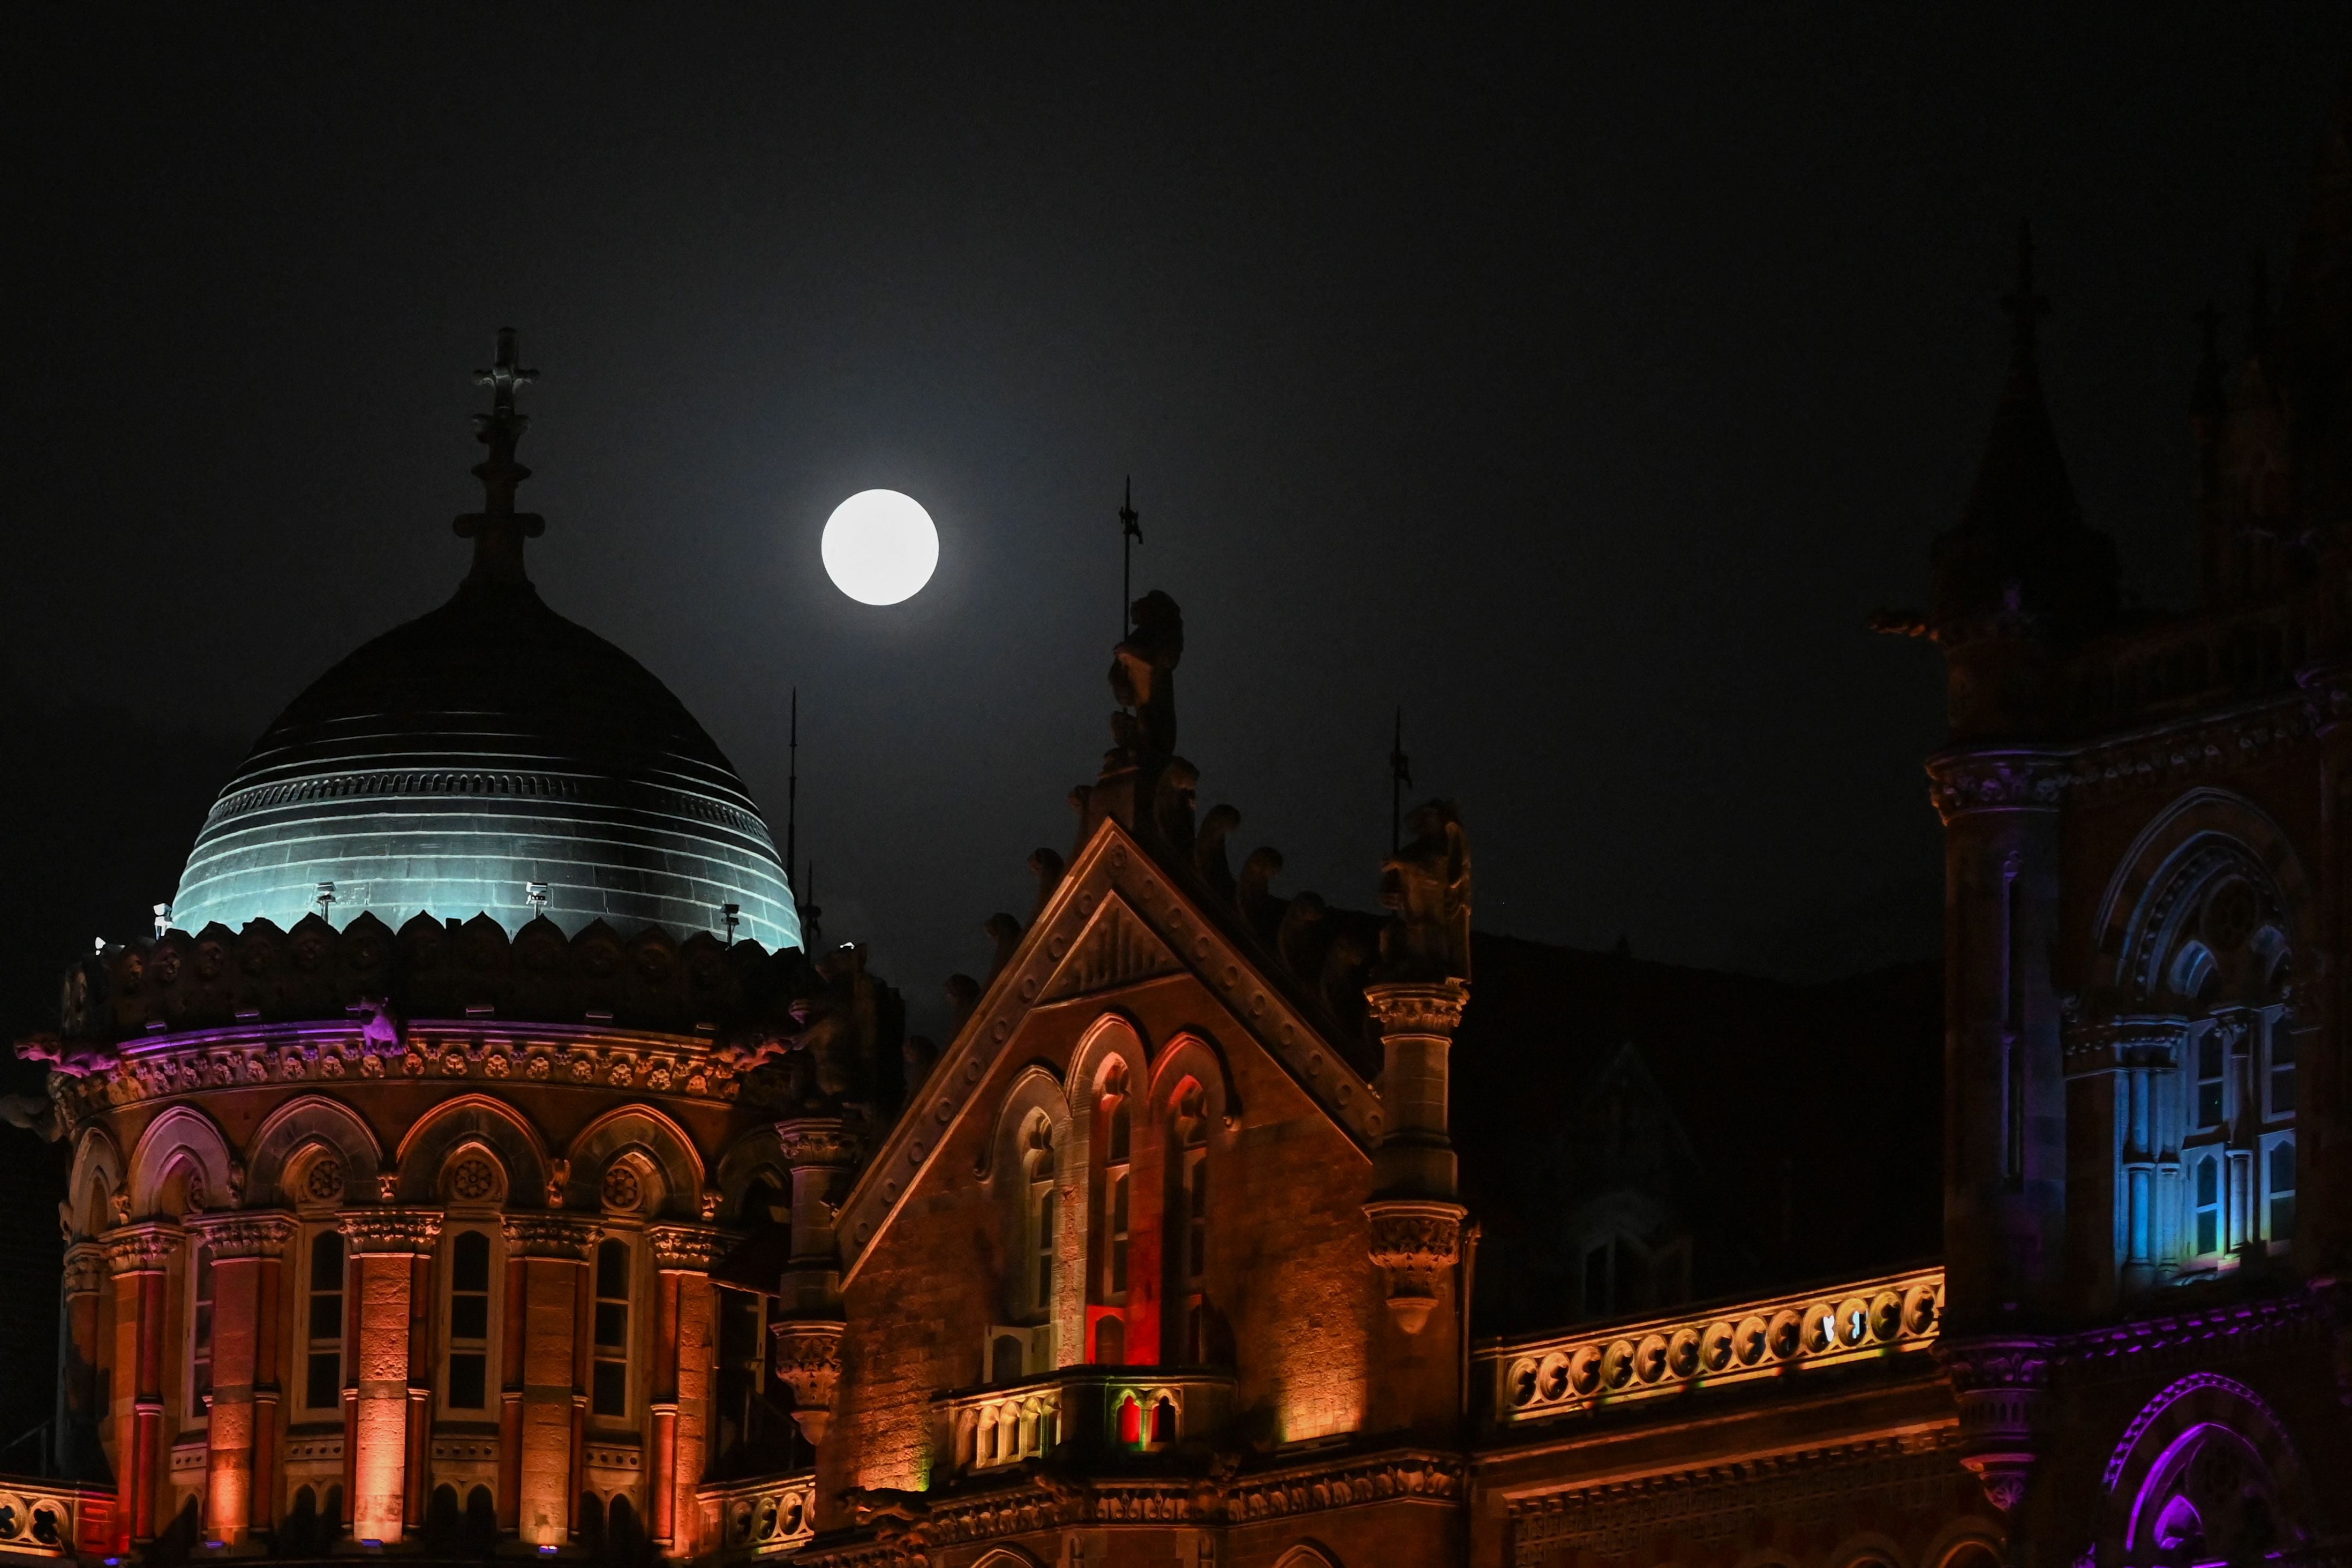 The moon pictured over the Chhatrapati Shivaji Terminus railway station building in Mumbai on 26 May 2021